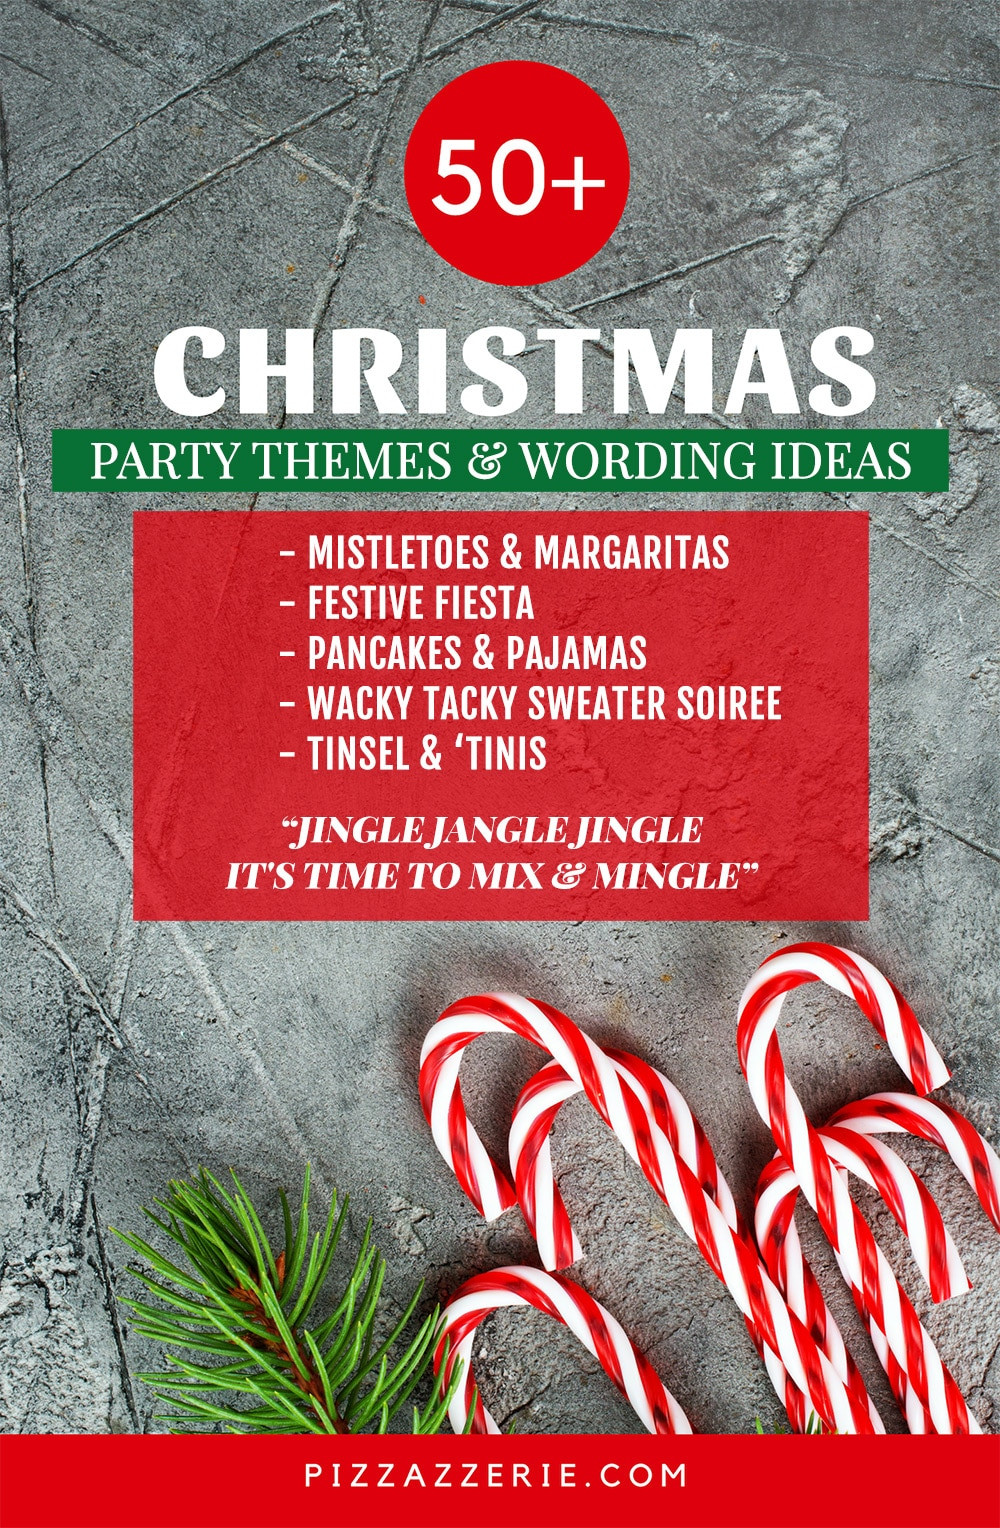 Holiday Party Names Ideas
 50 CHRISTMAS PARTY THEMES & CLEVER INVITATION WORDING